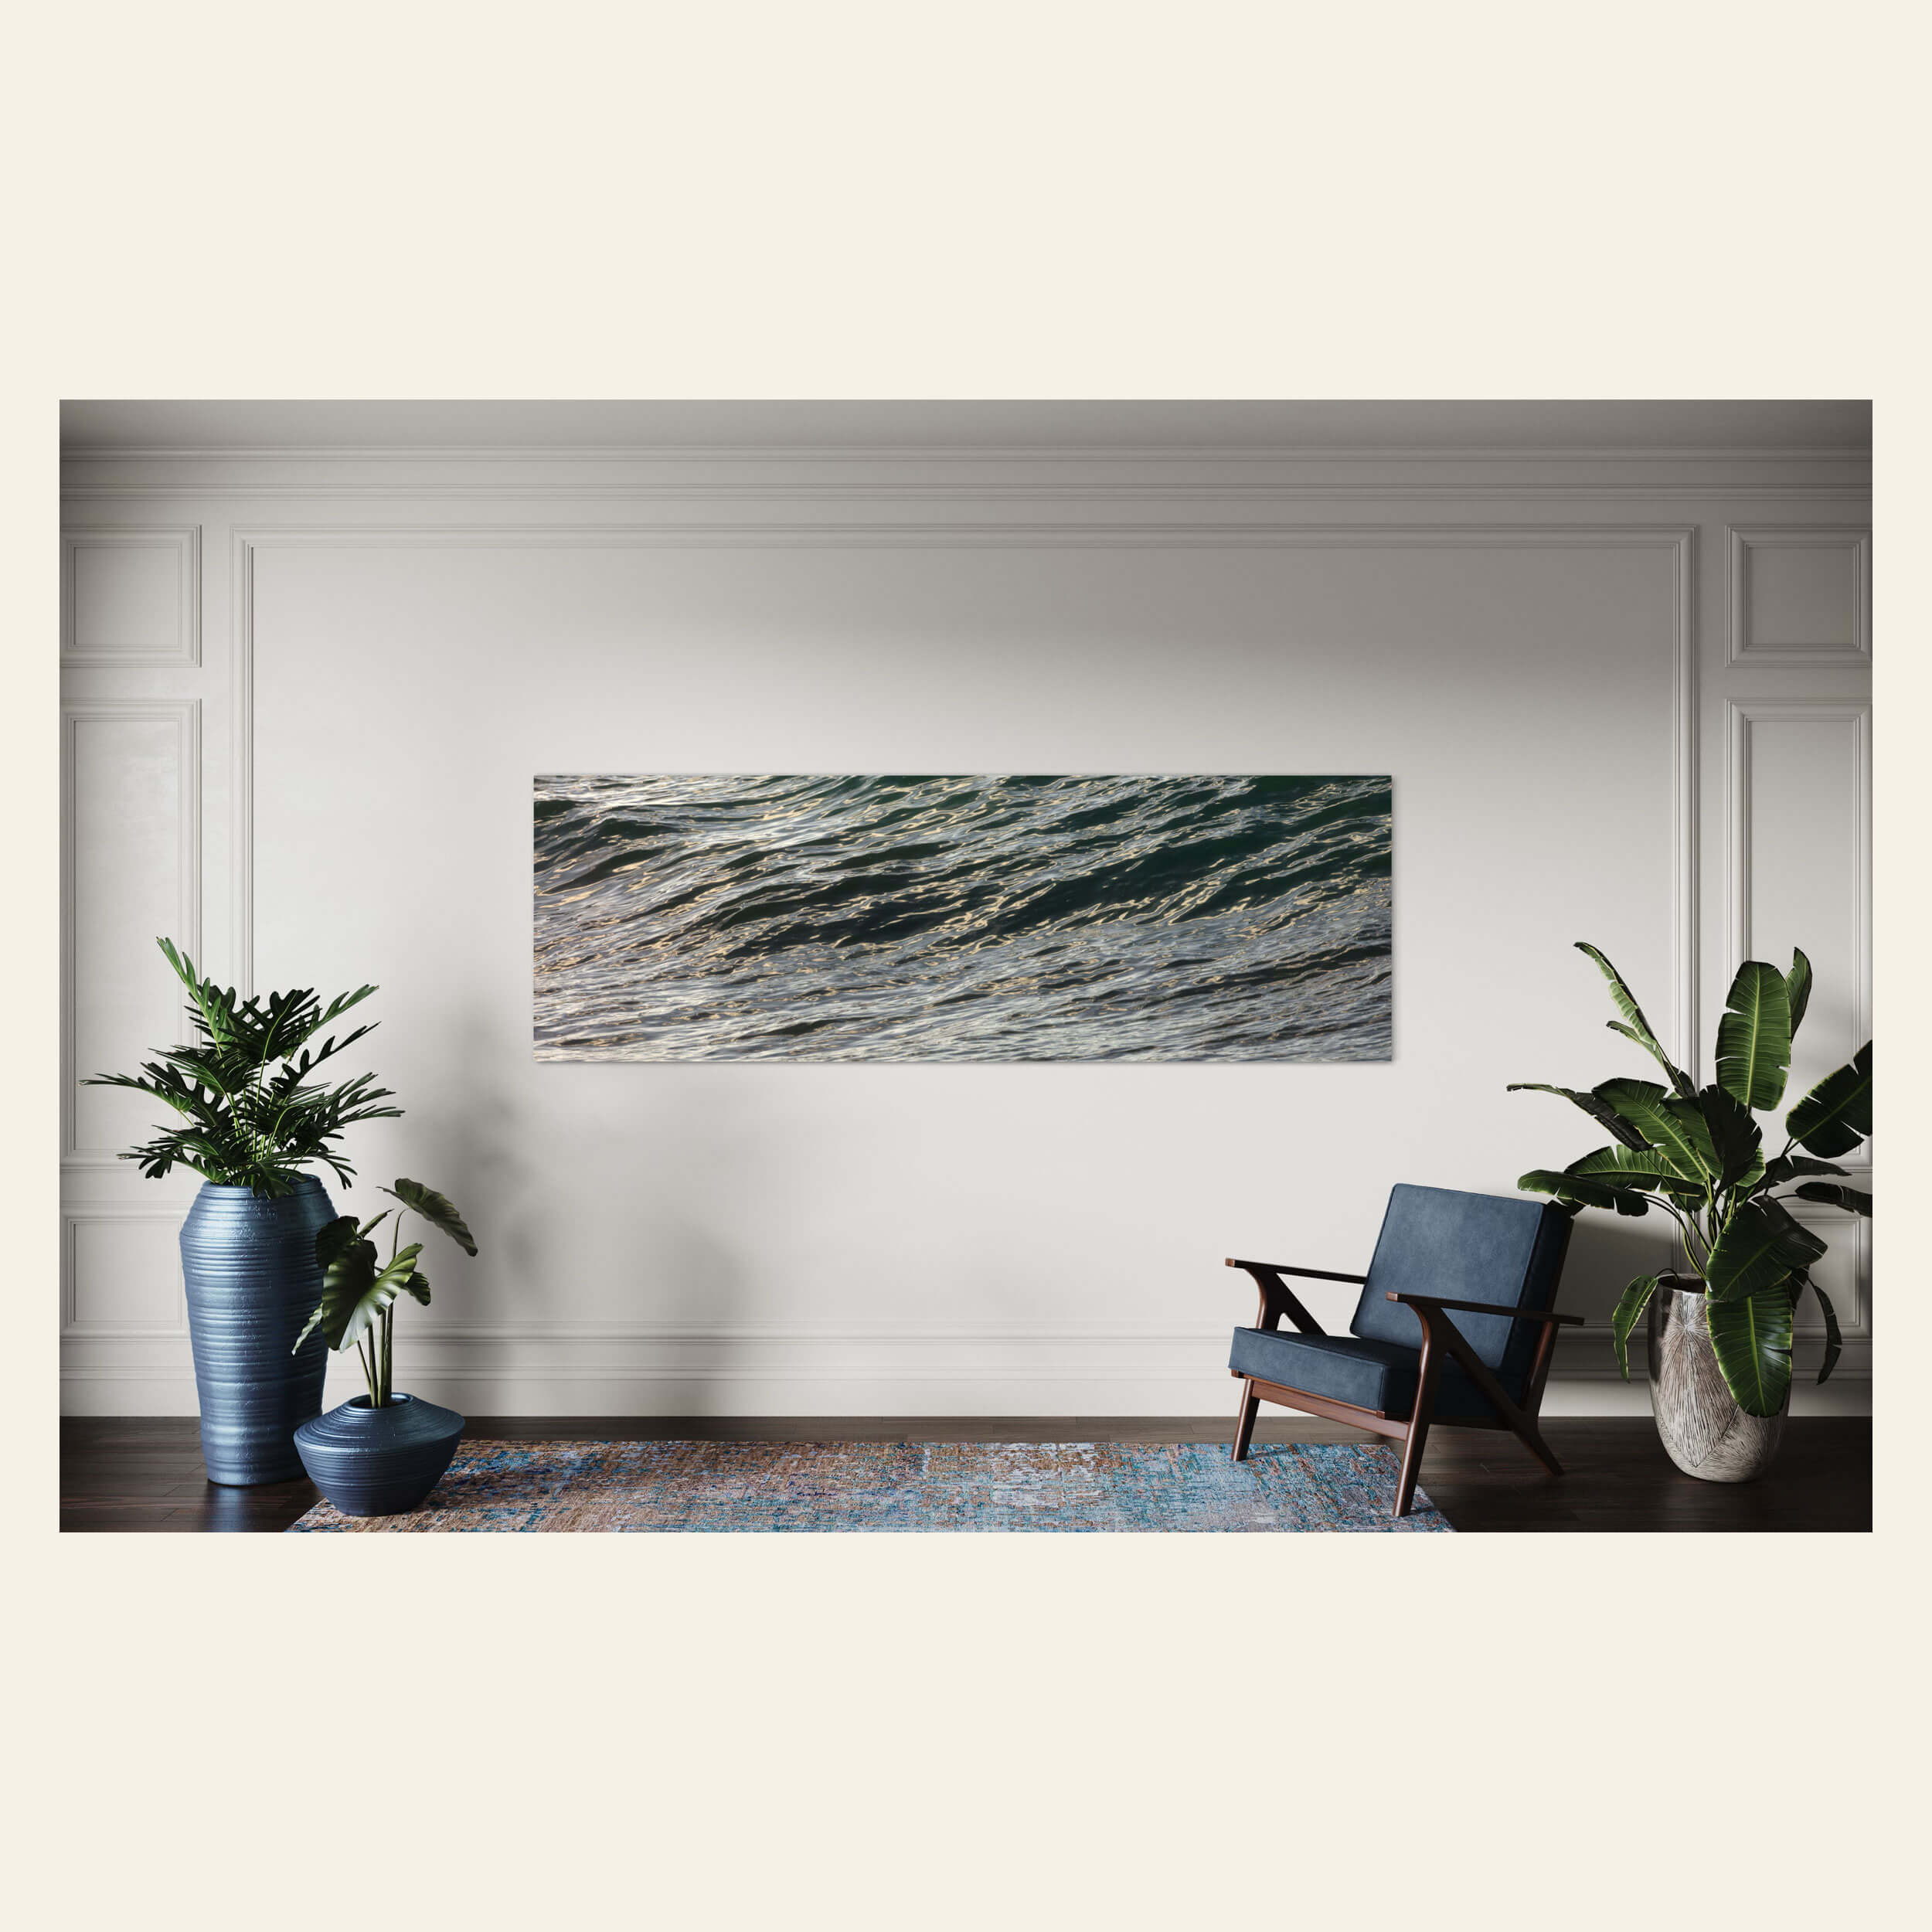 An ocean picture from Kauai hangs in a living room.